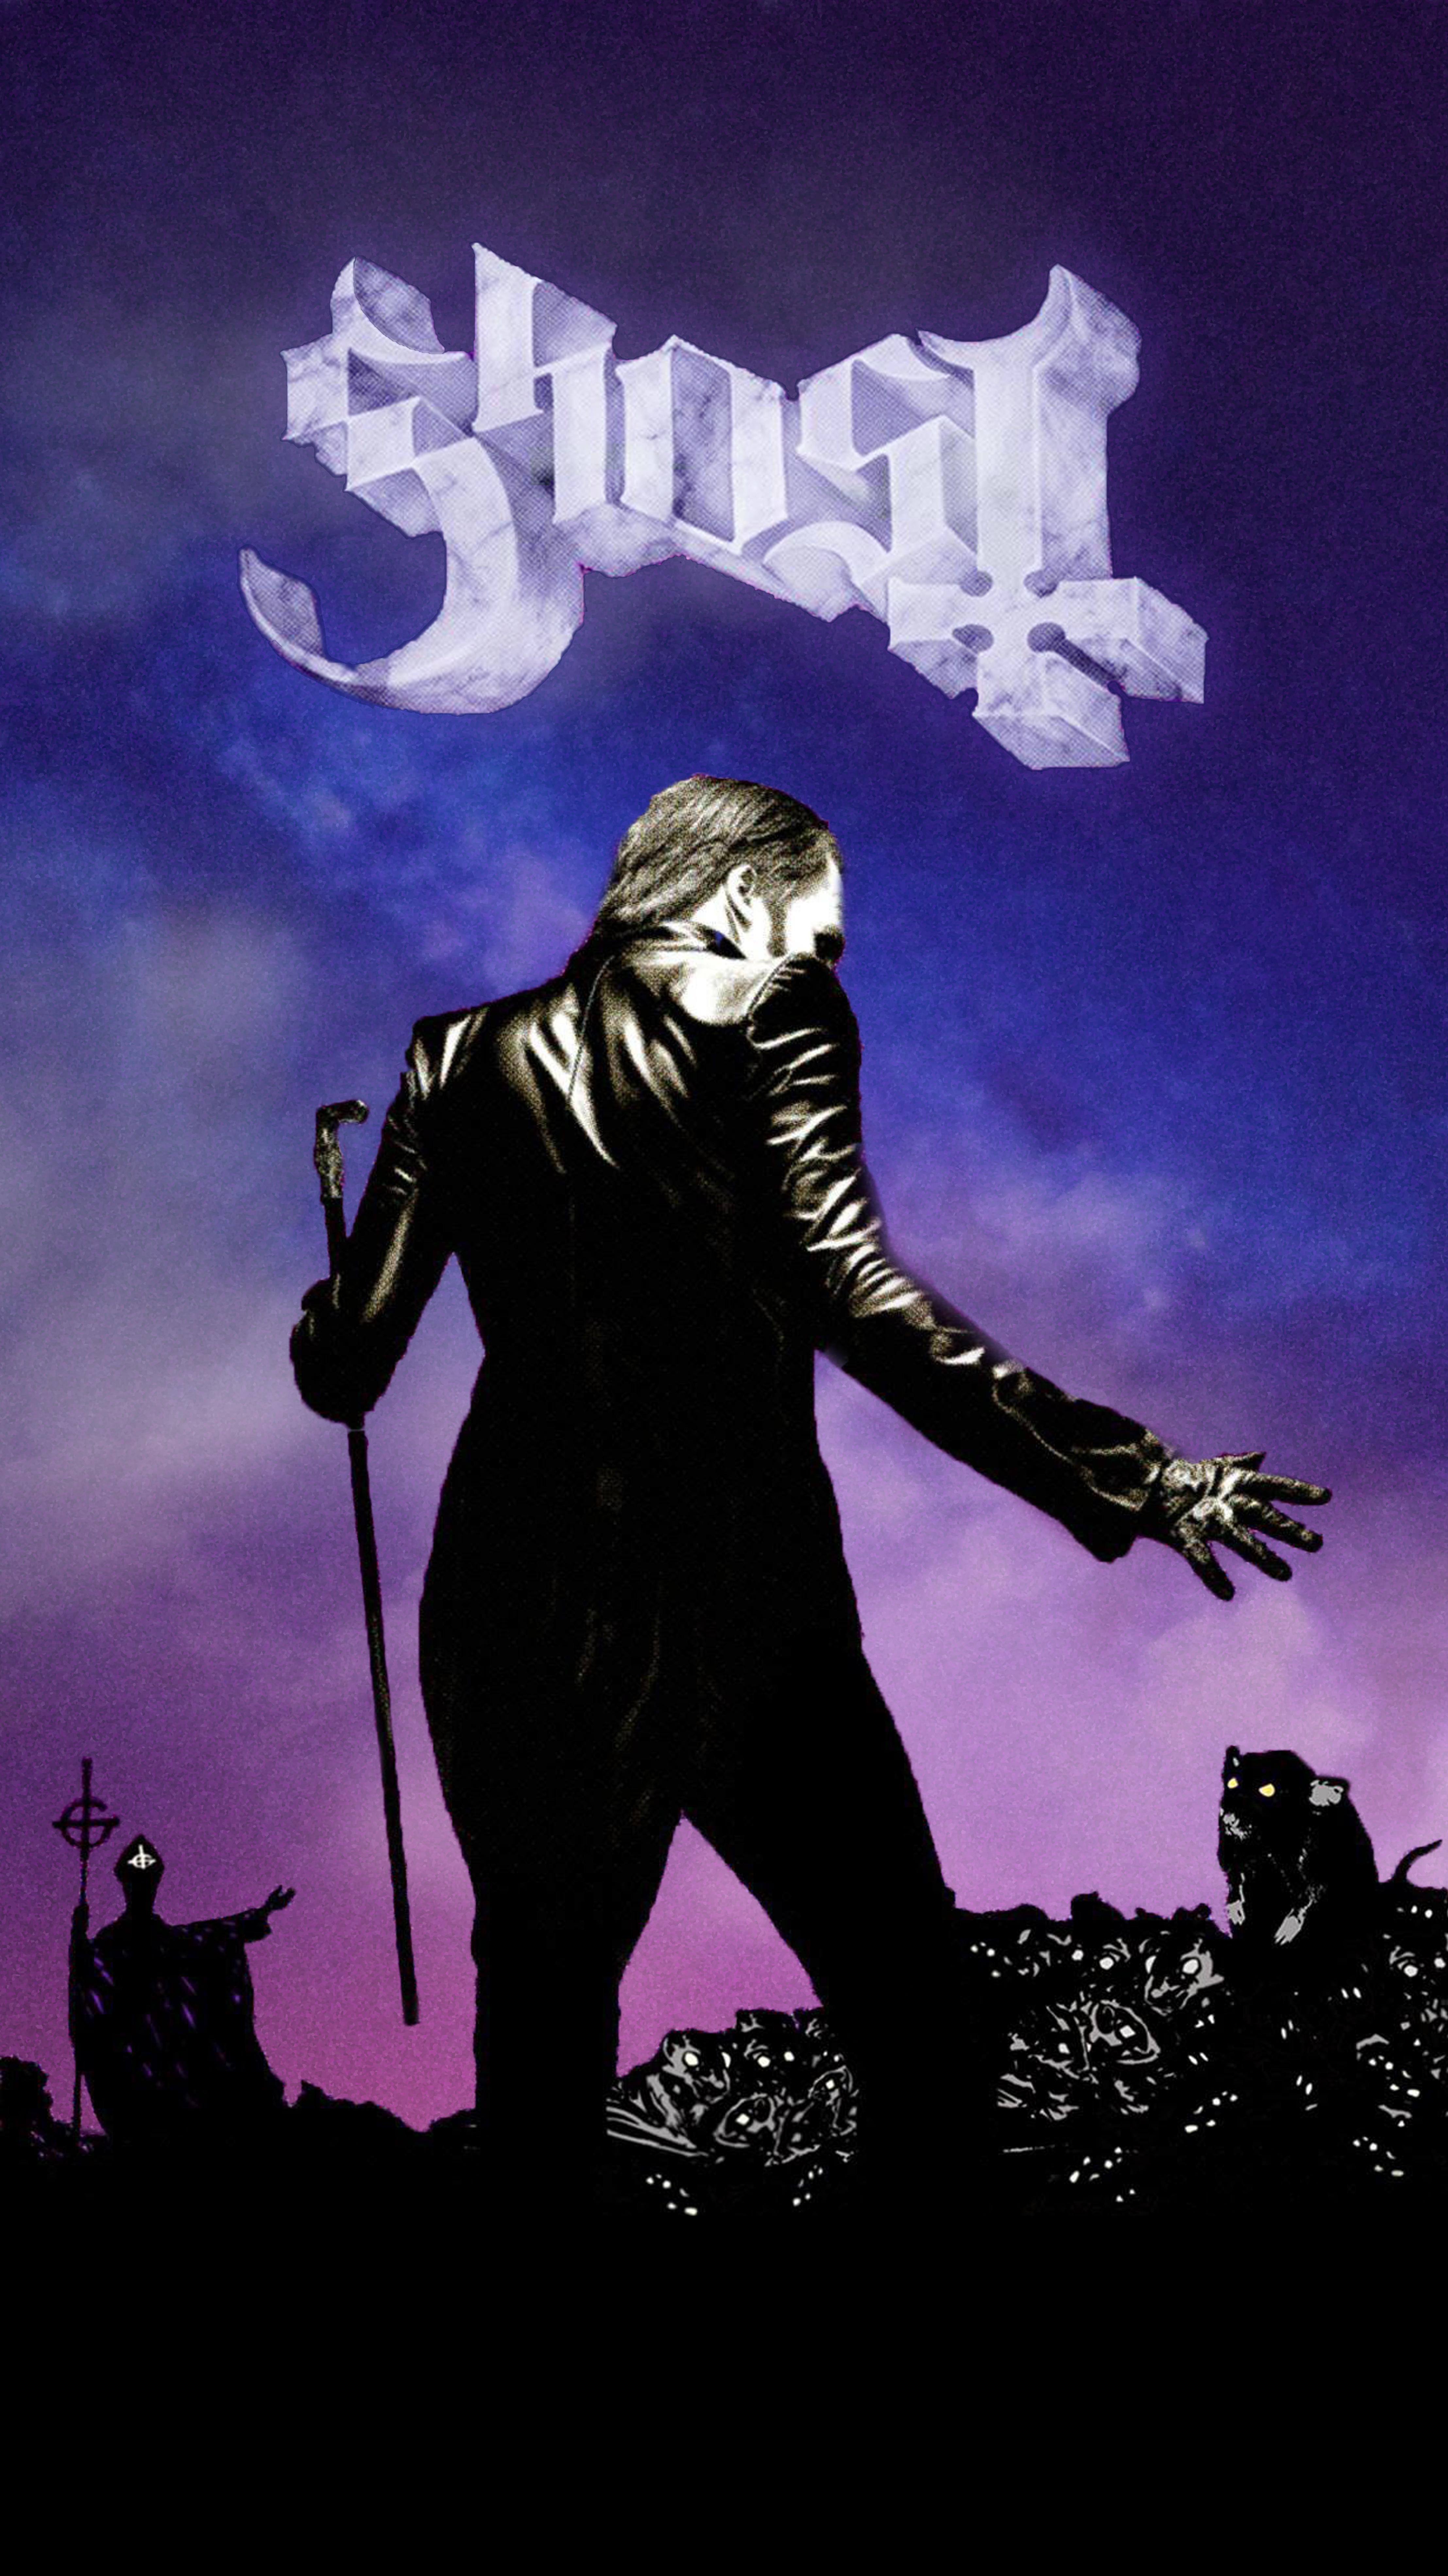 ghost live wallpaper,album cover,poster,fictional character,darkness,fiction